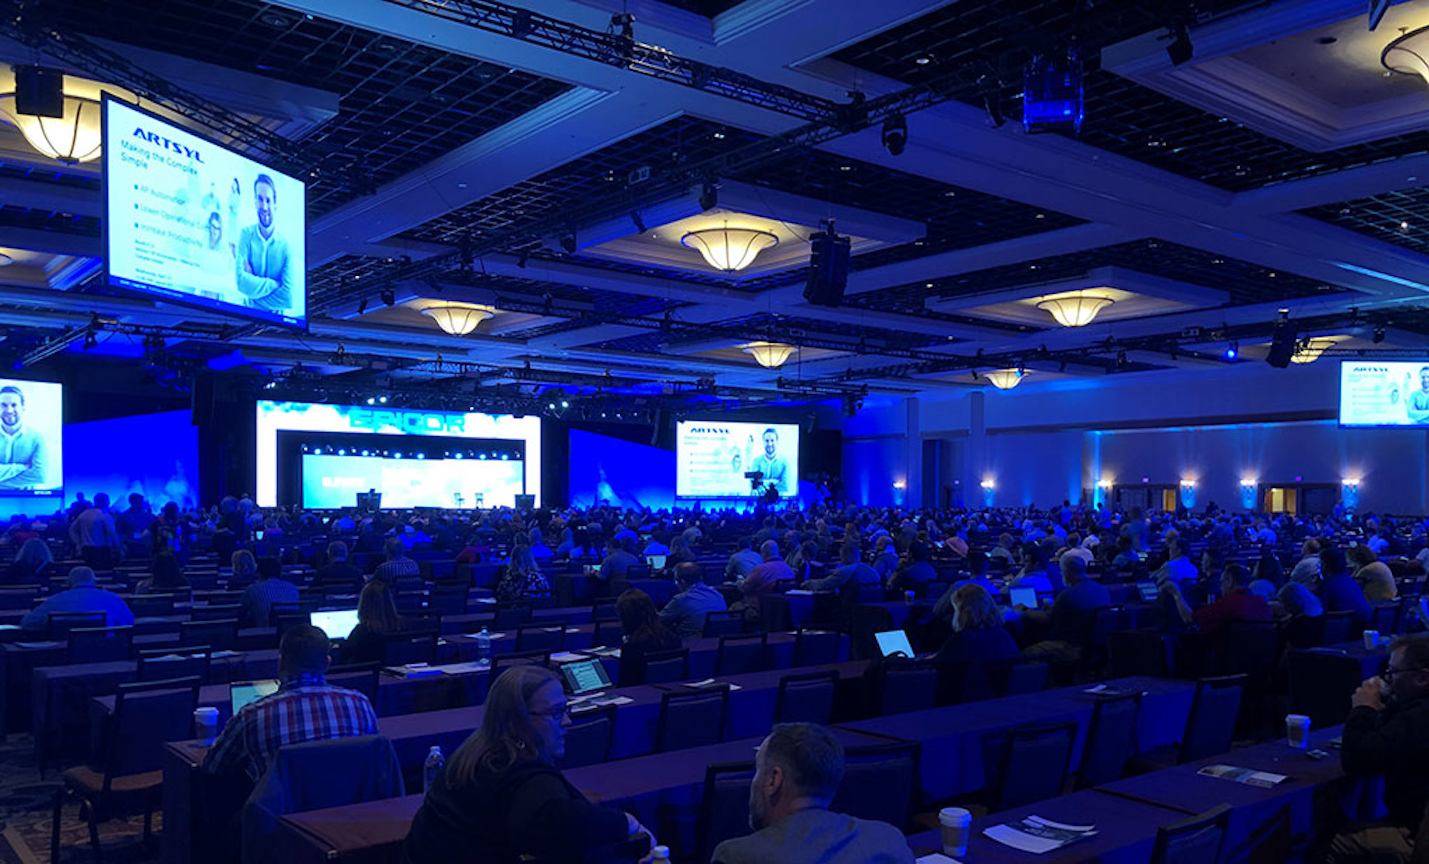 Epicor Insights 2019 Users Conference Draws an Estimated 4,000